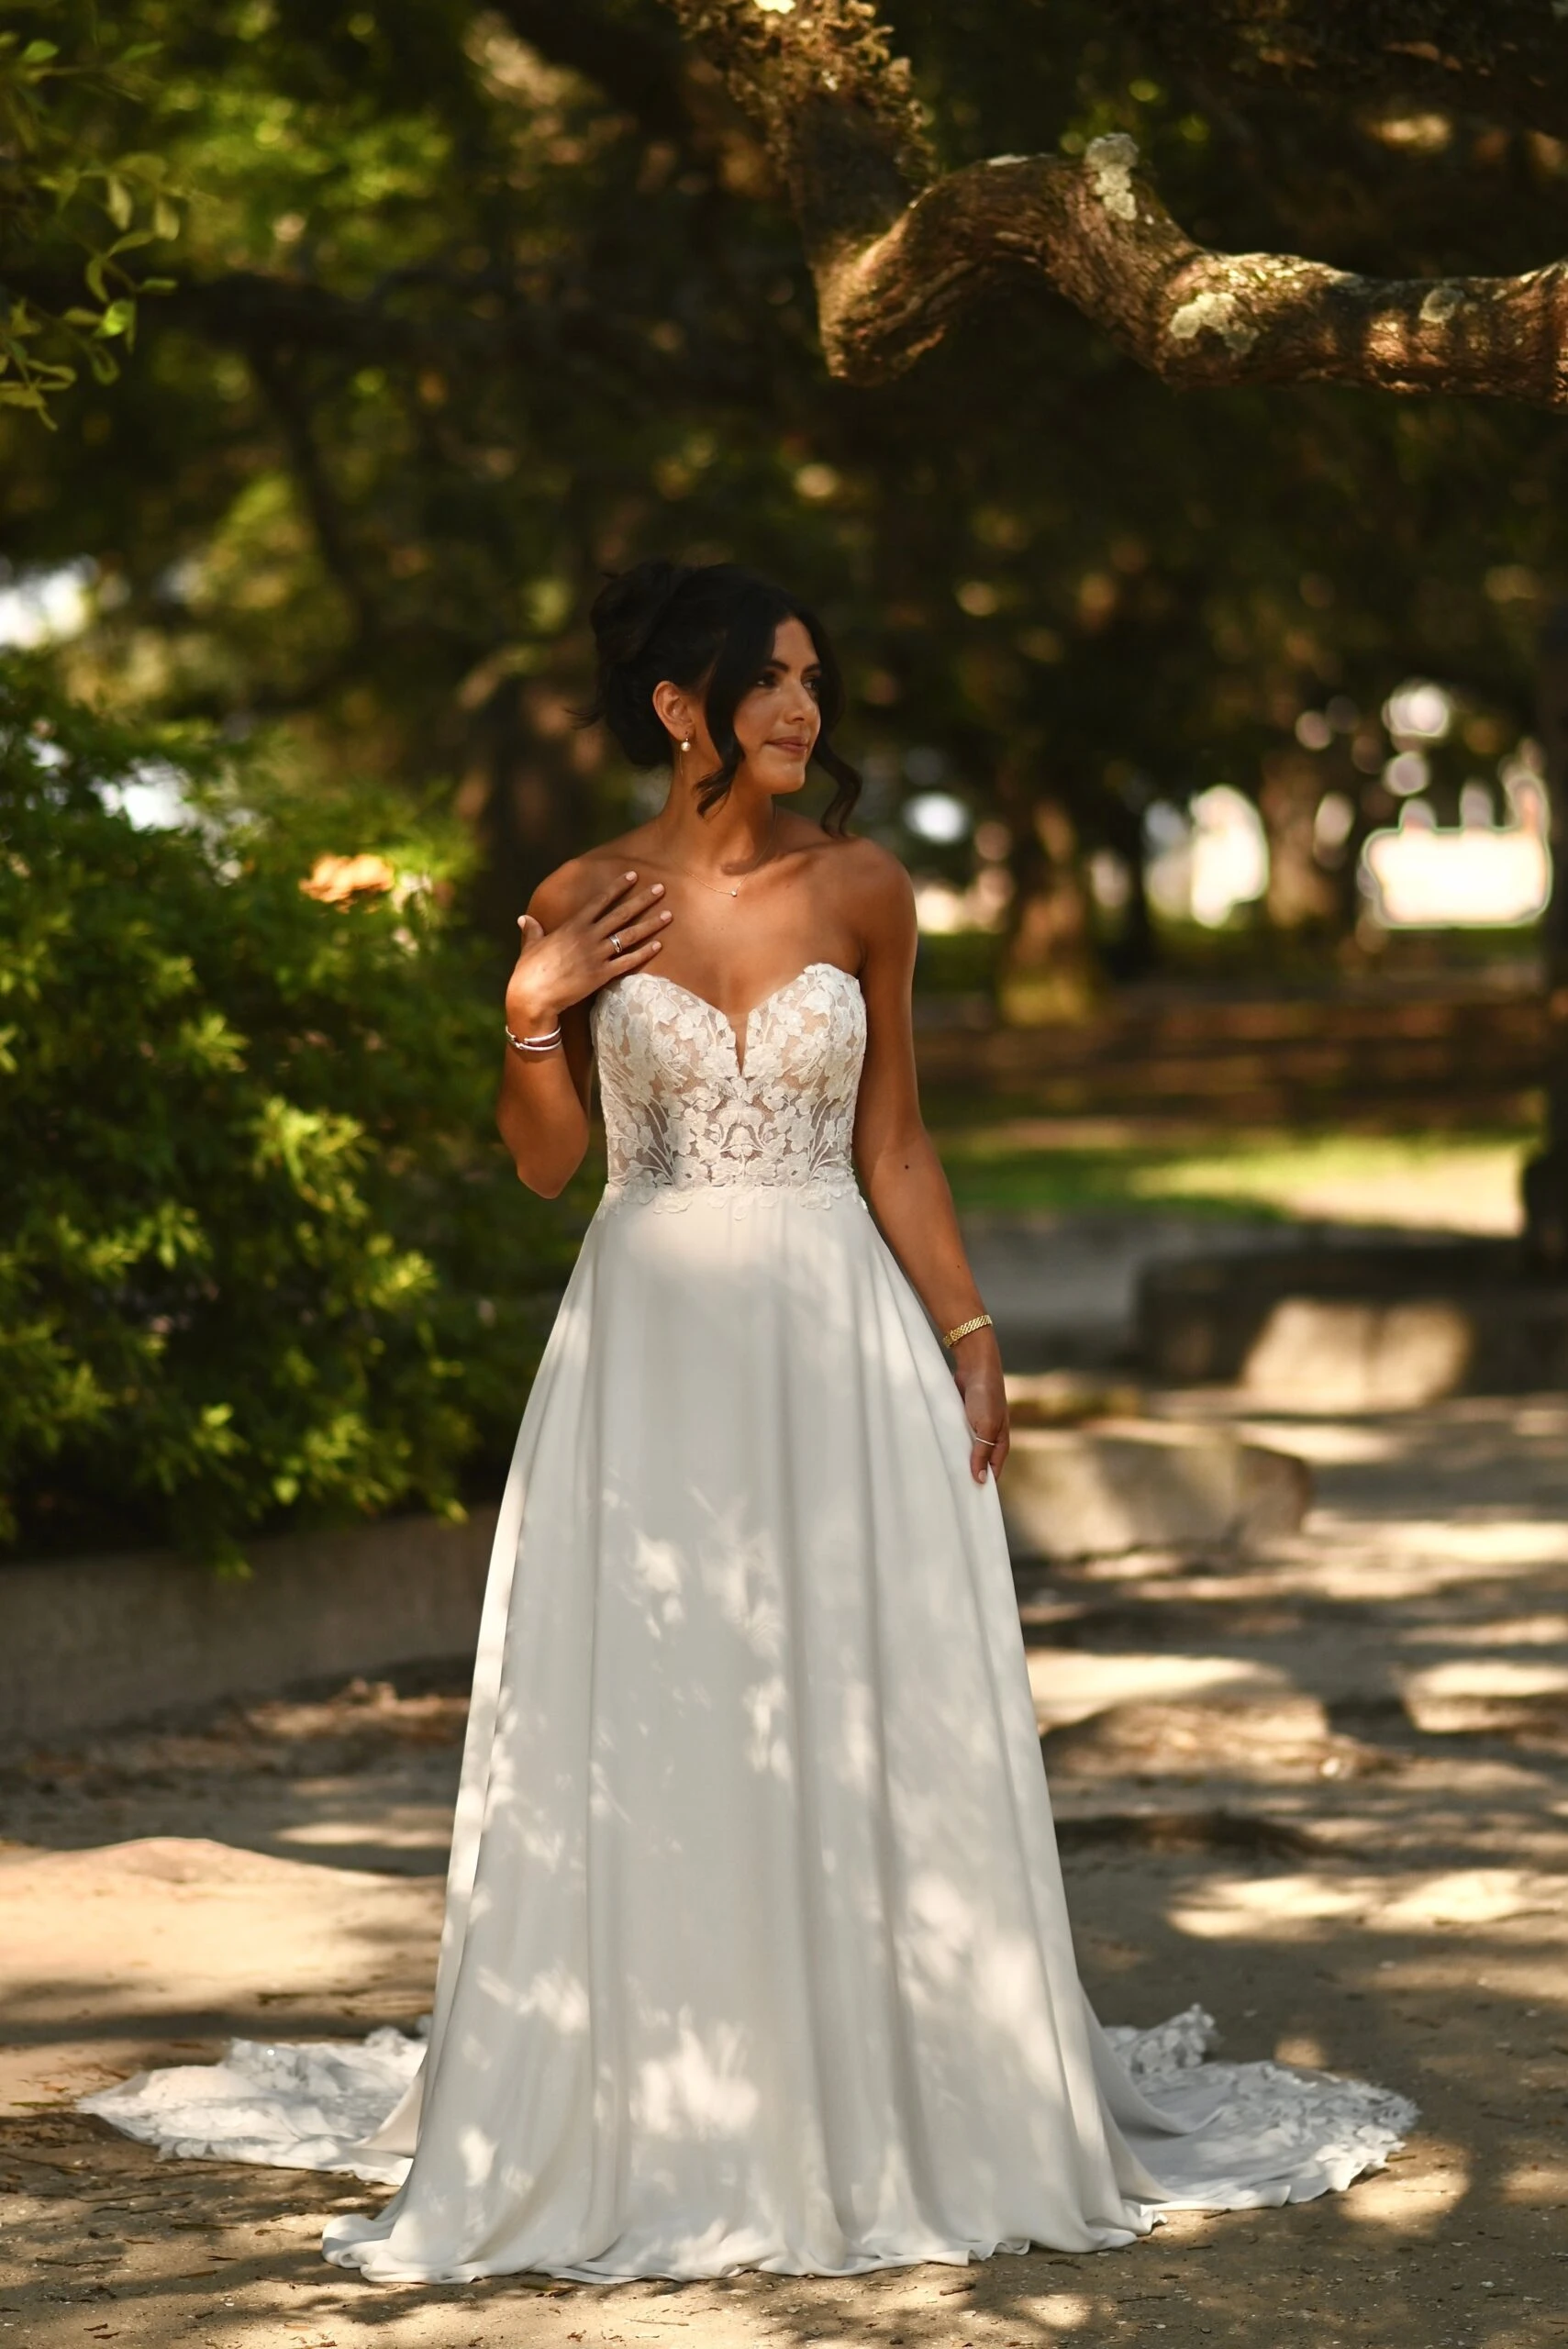 a-line wedding dress with floral lace bodice - D3862 by Essense of Australia